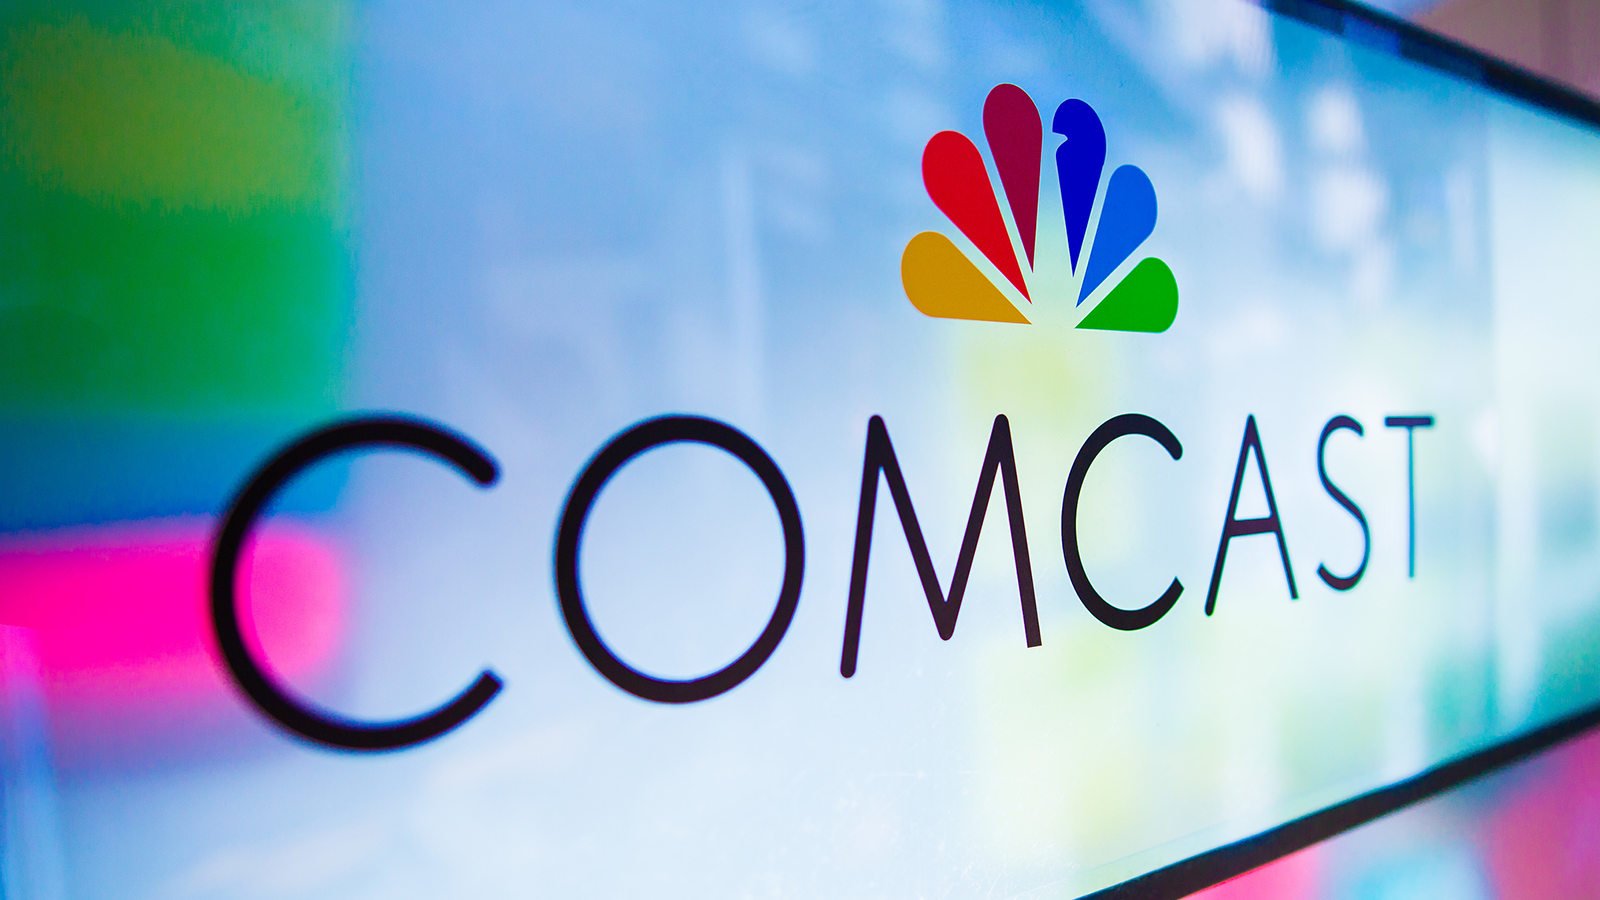 6G doesn’t exist yet, but Comcast has agreed to stop using 10G branding